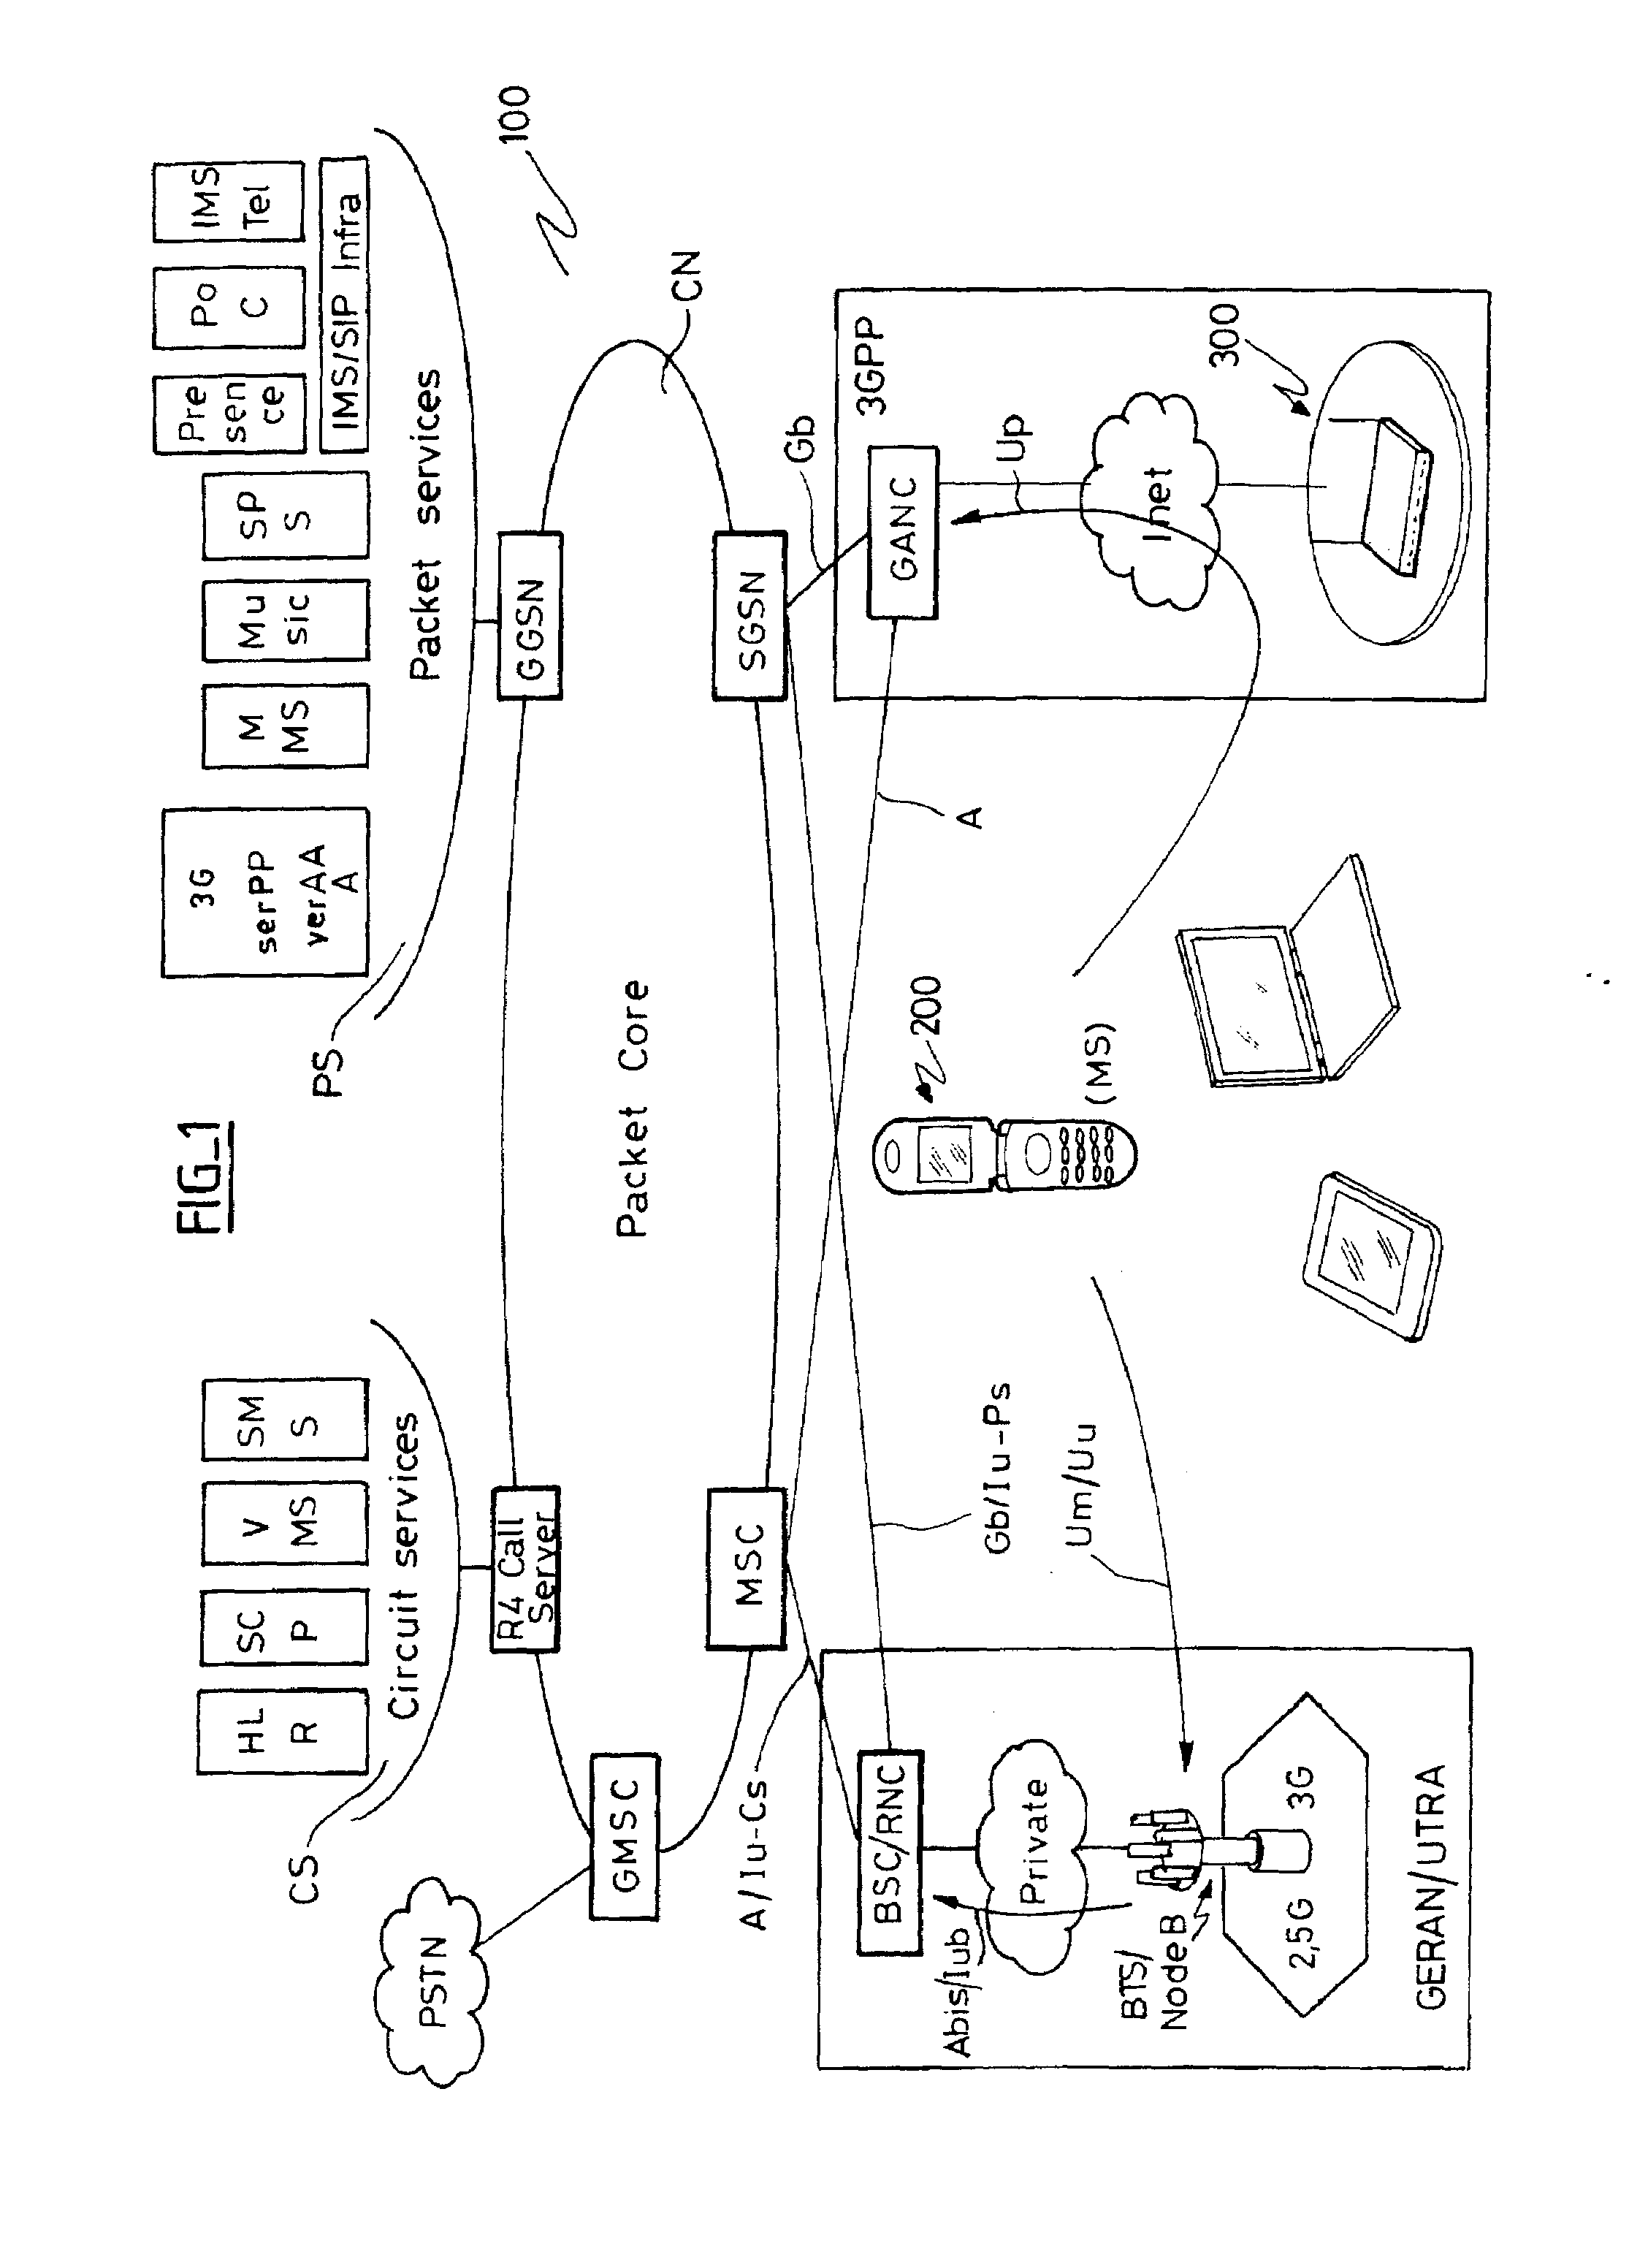 Radio communication device with access means conforming to the GAN and 3gpp-wlan interworking technologies, and corresponding access network controller